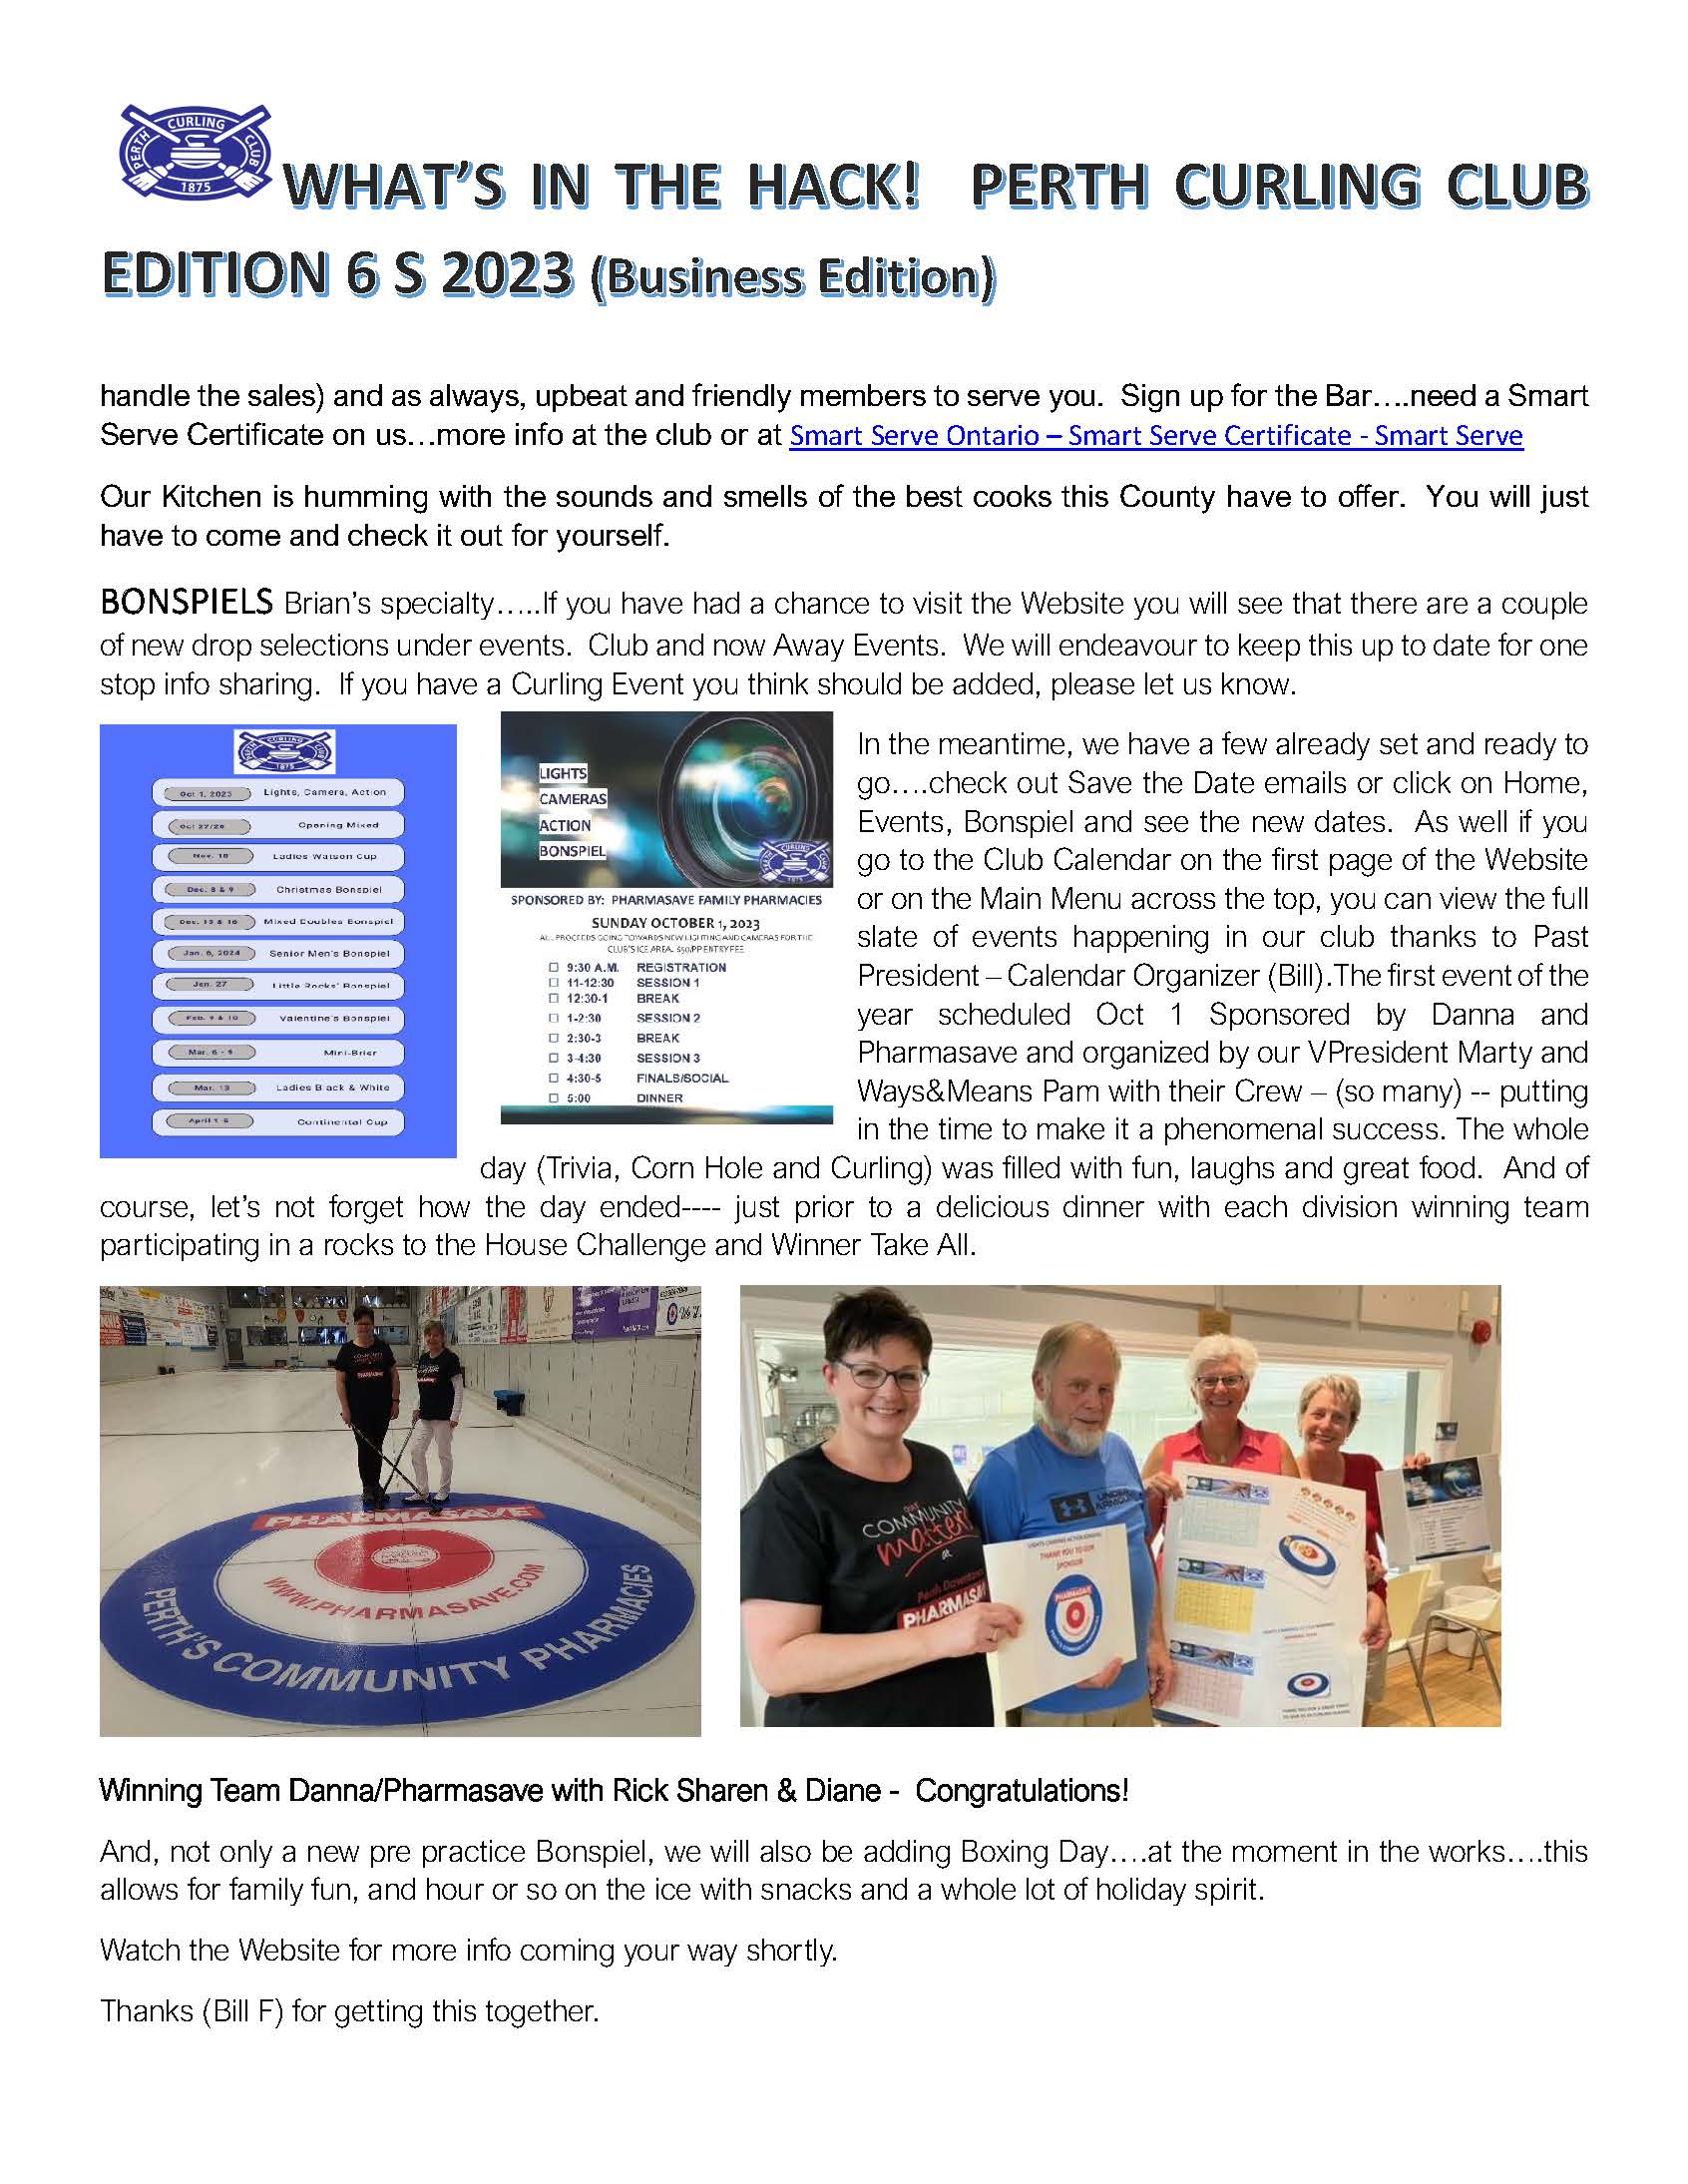 New whats in the hack Issue 6 October 2023 final edit Page 2